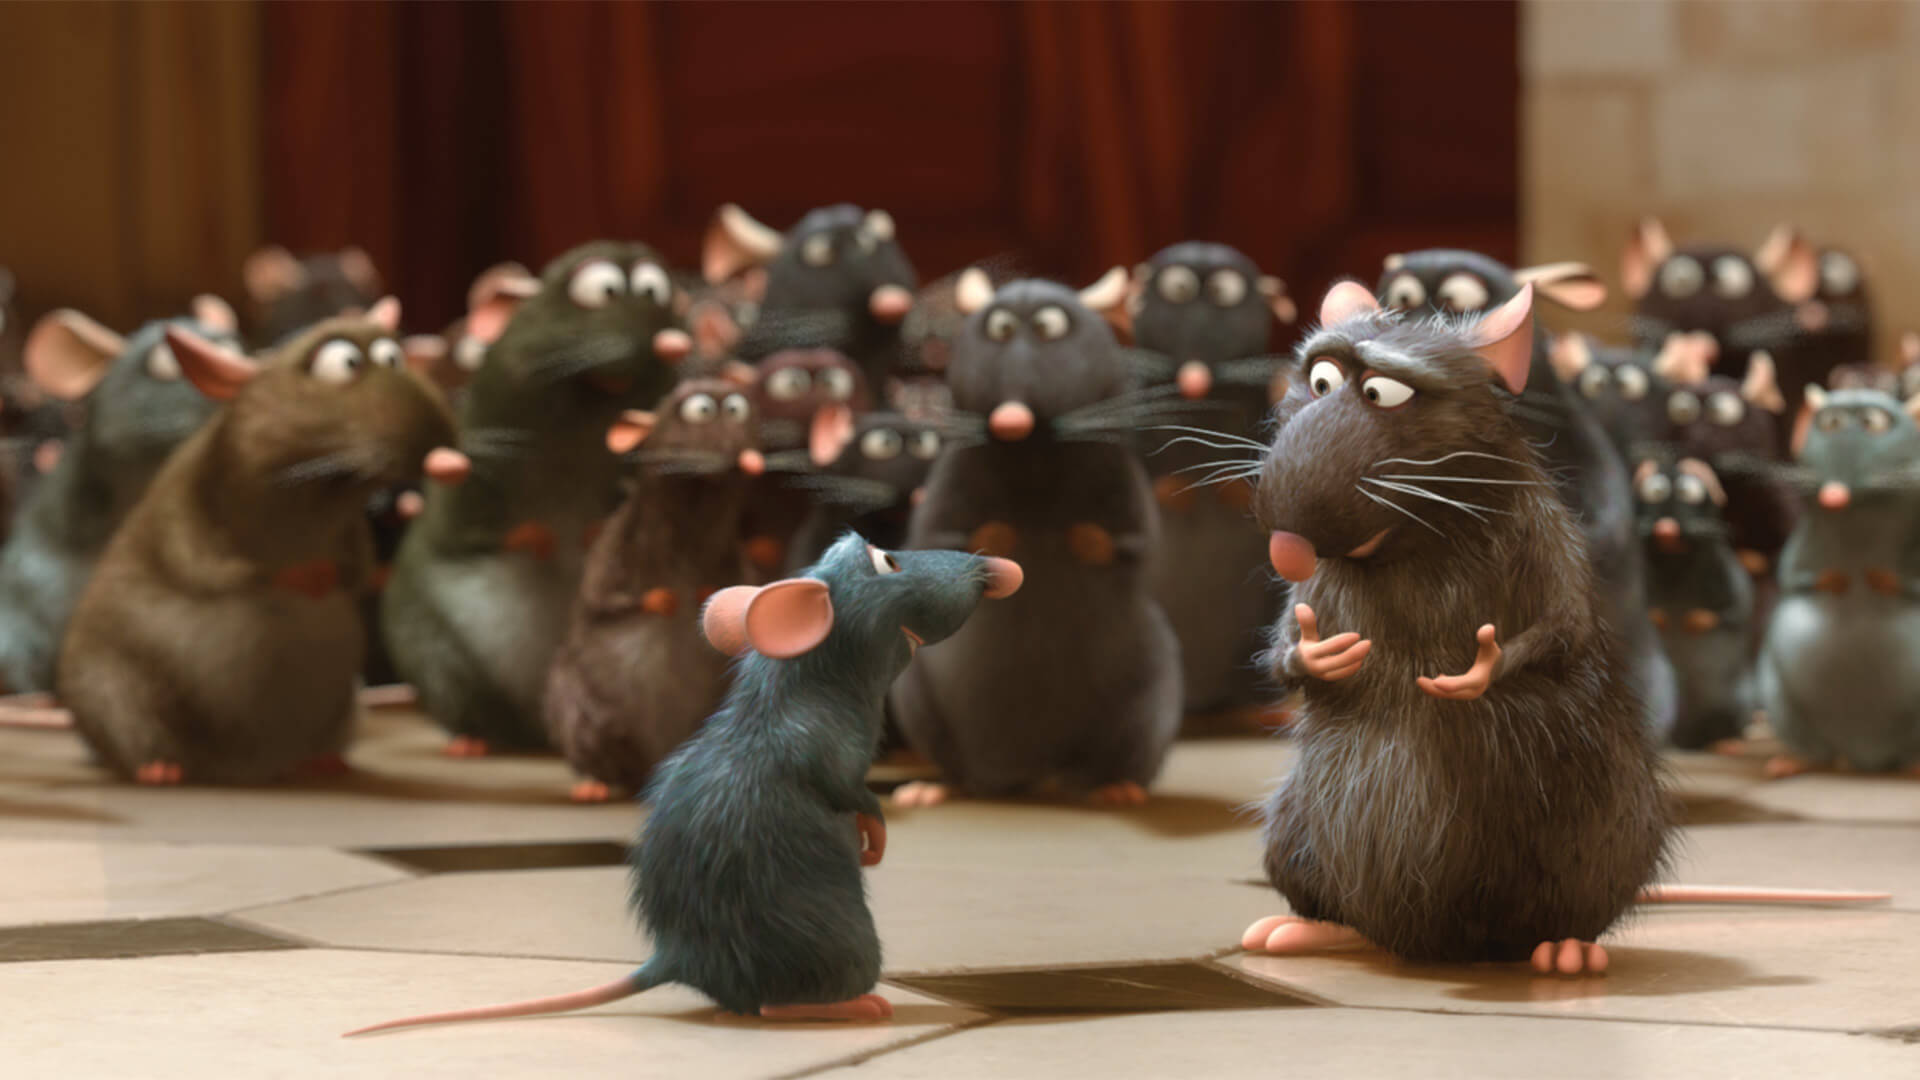 Background rats from "Ratatouille"